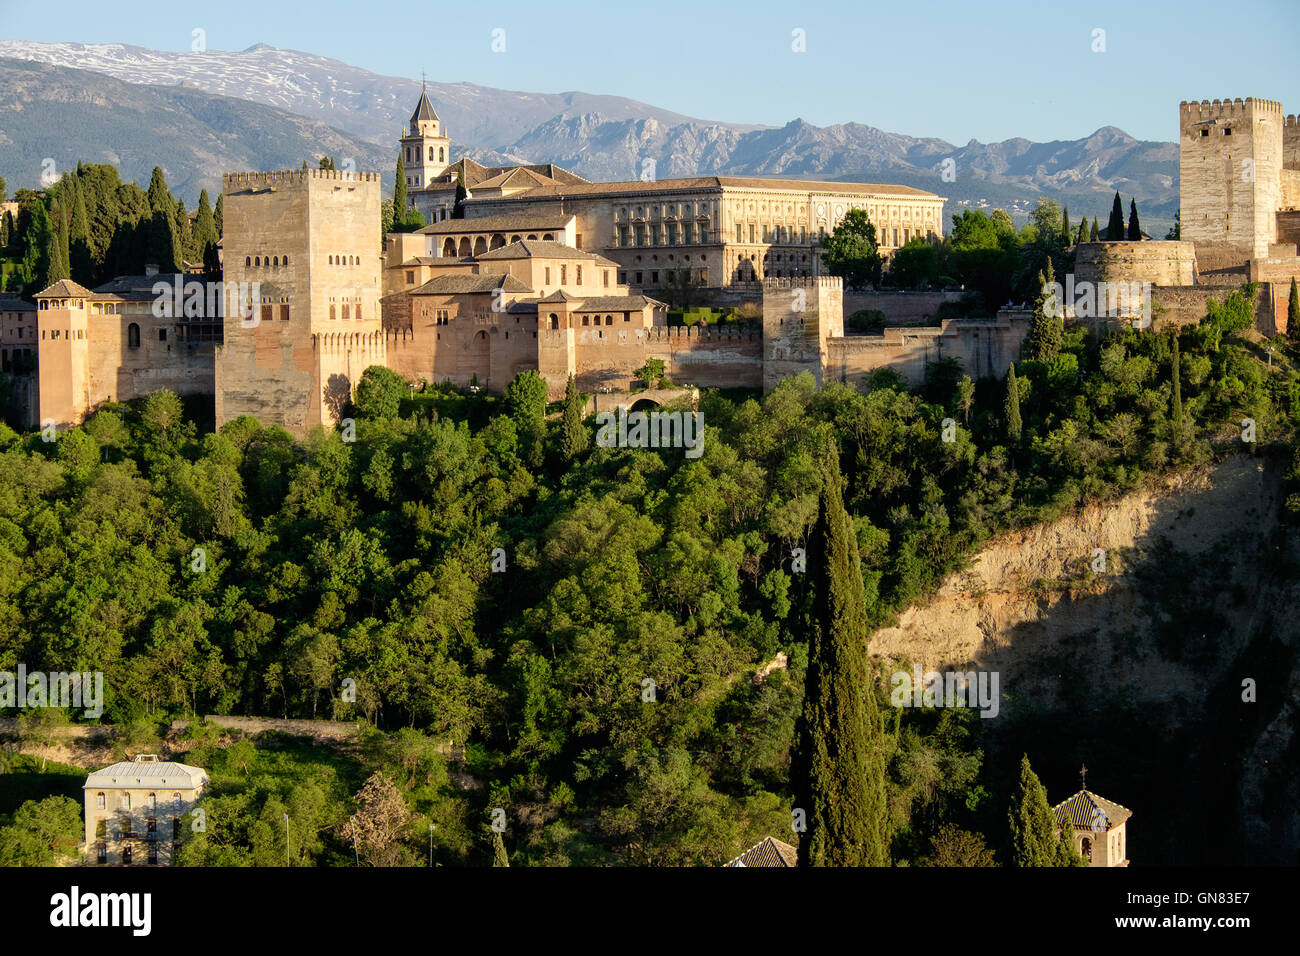 The Alhambra Palace, Granada, Spain with the Sierra Nevada mountains in the background Stock Photo